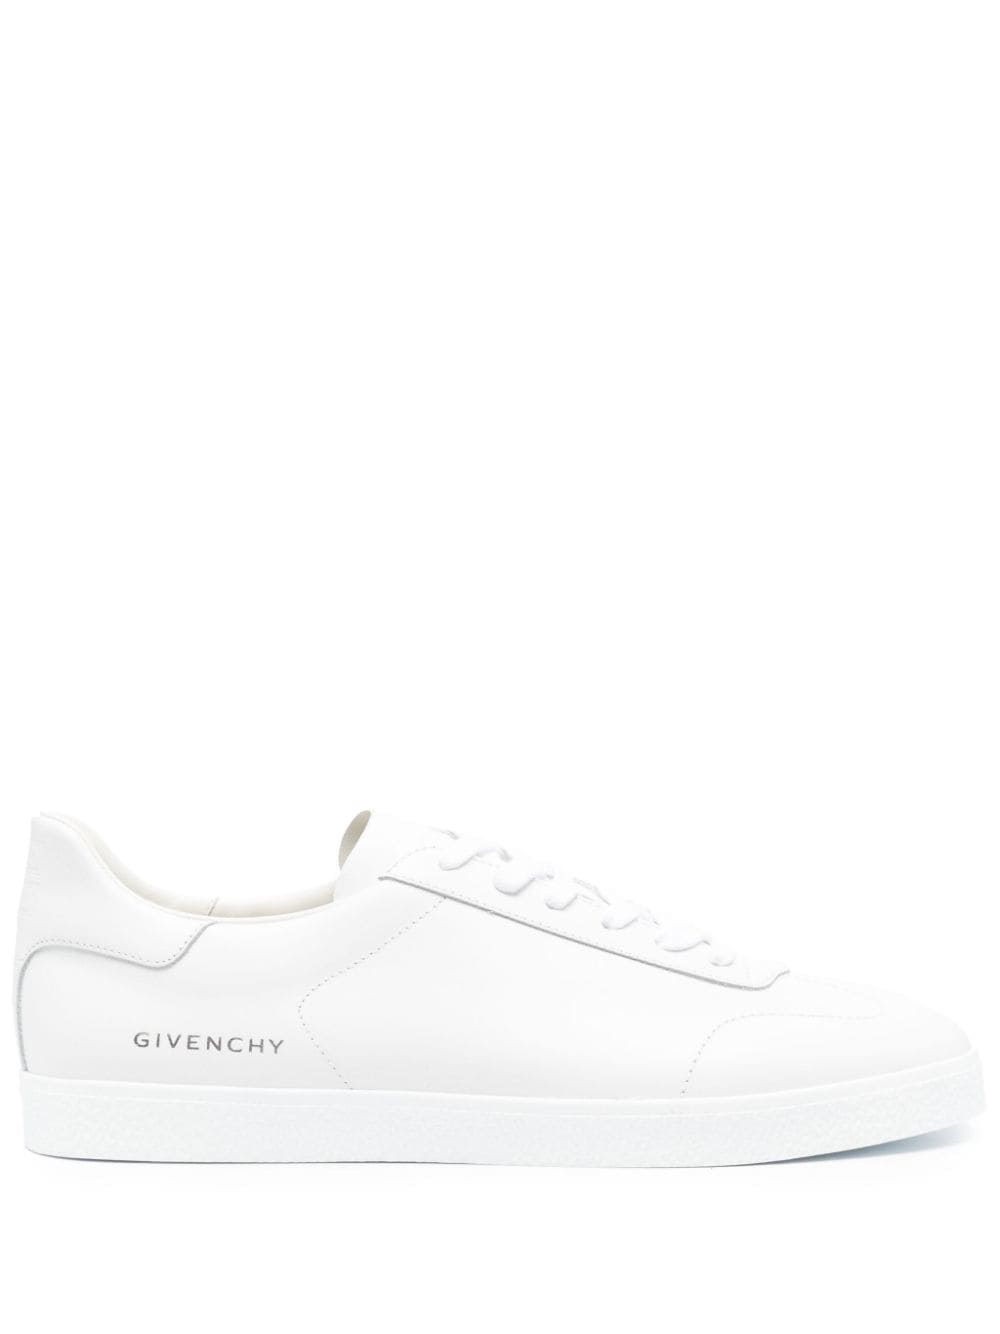 Town leather sneakers<BR/><BR/><BR/>